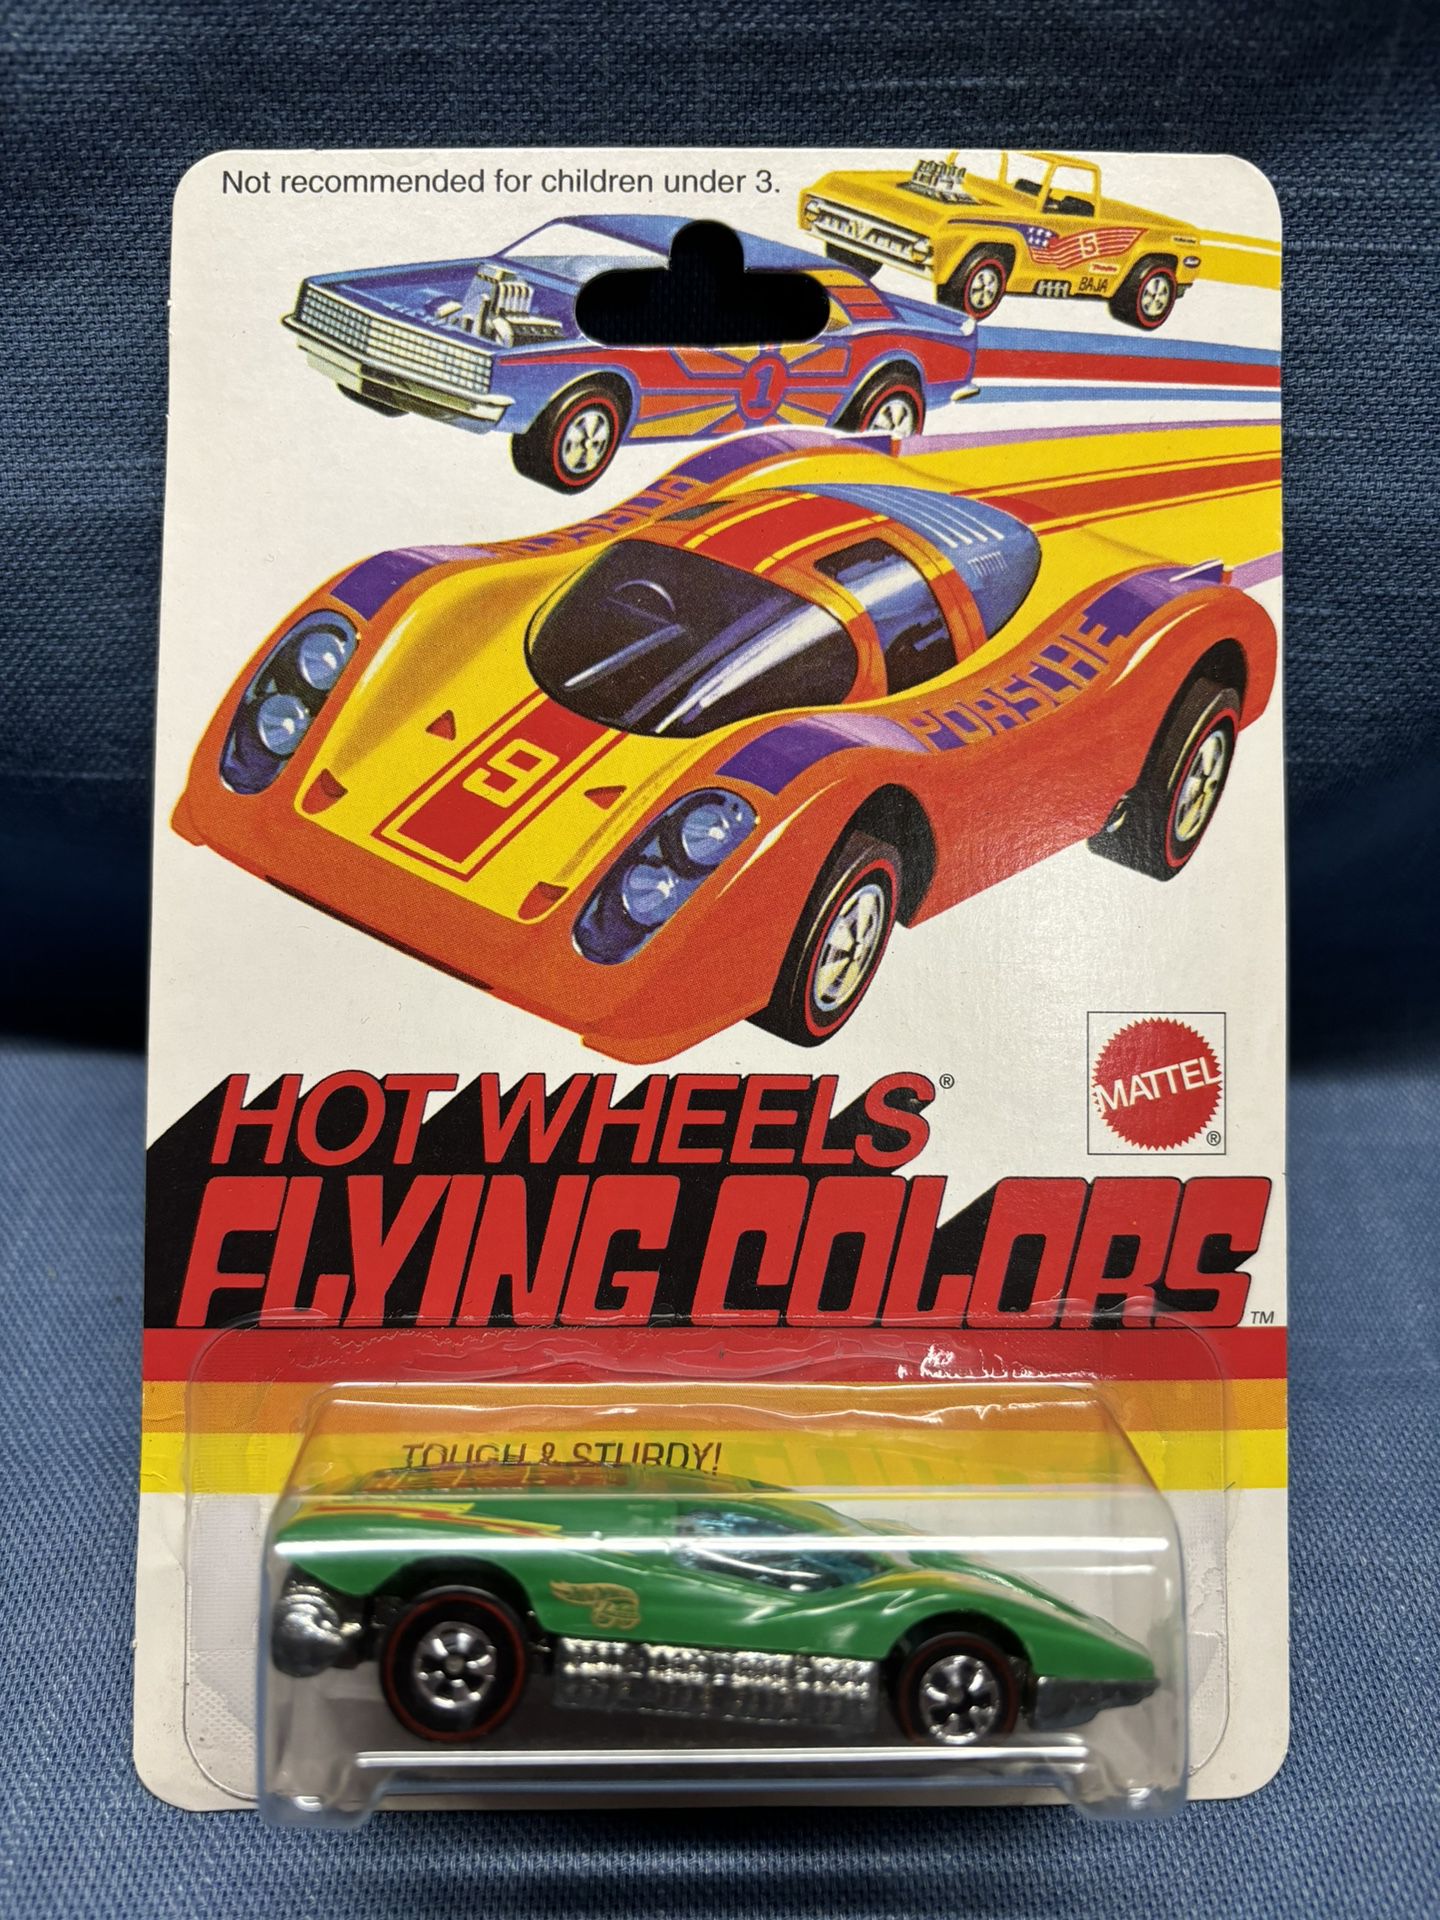 Hot Wheels Flying Customs “Large Charge” (1997) - New in Blister Pack! 